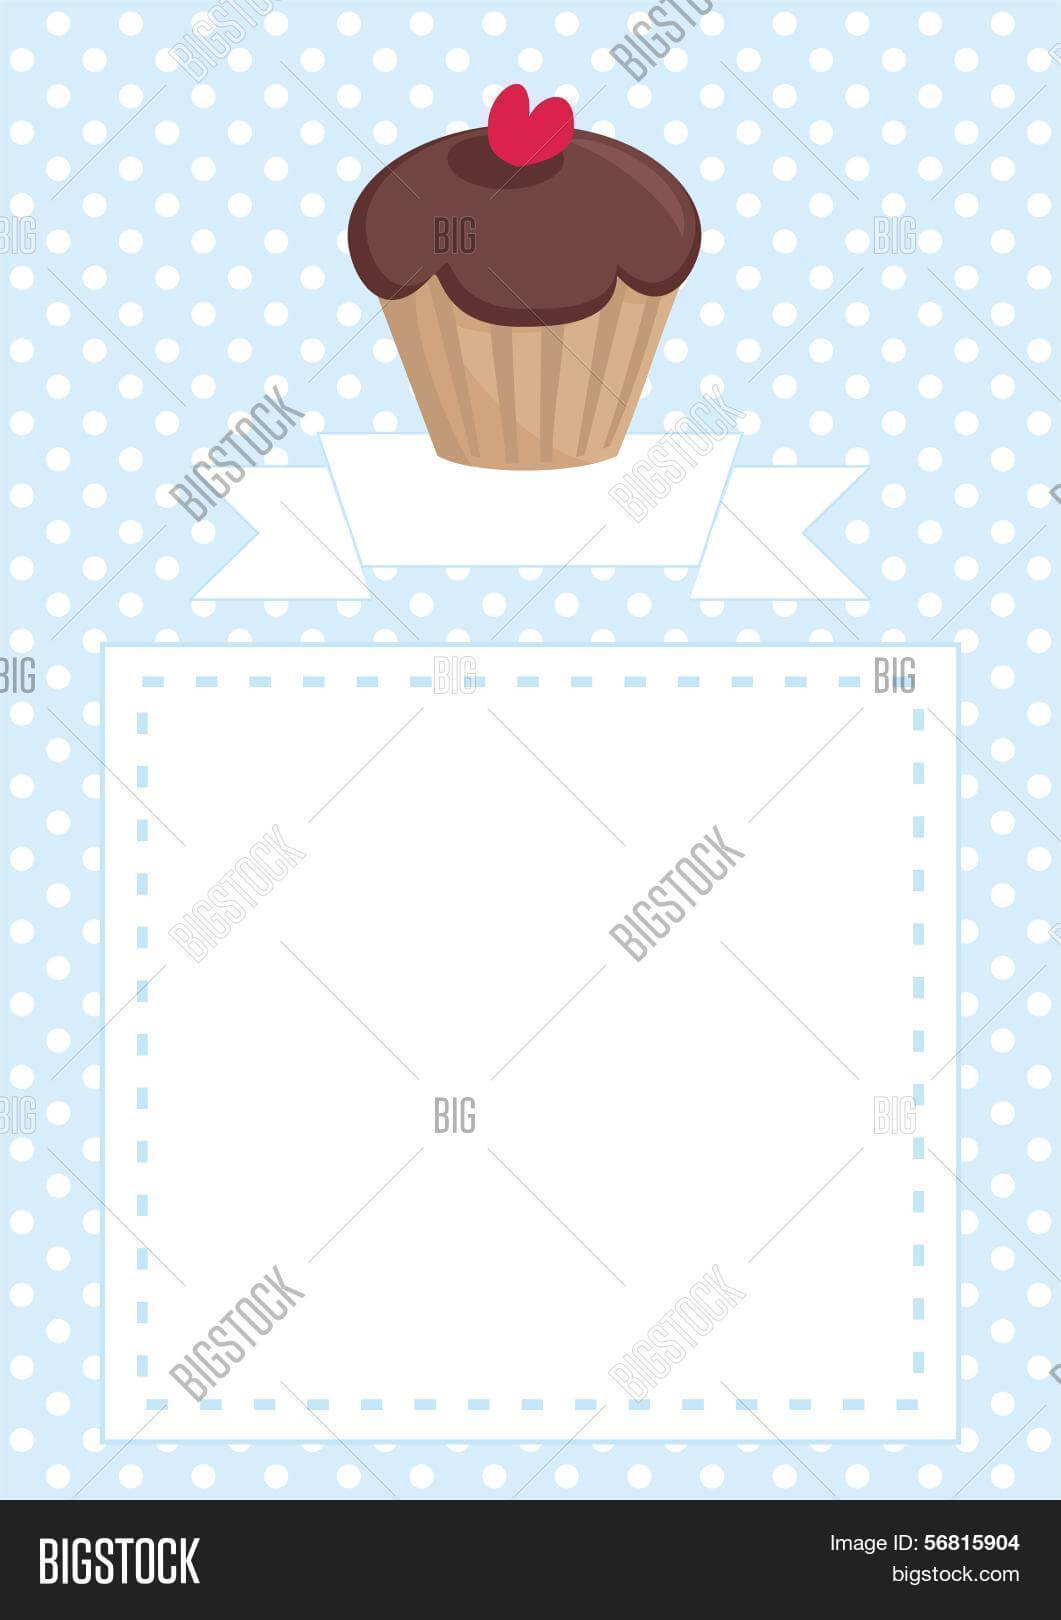 Restaurant Vector Vector & Photo (Free Trial) | Bigstock Pertaining To Baby Shower Menu Template Free